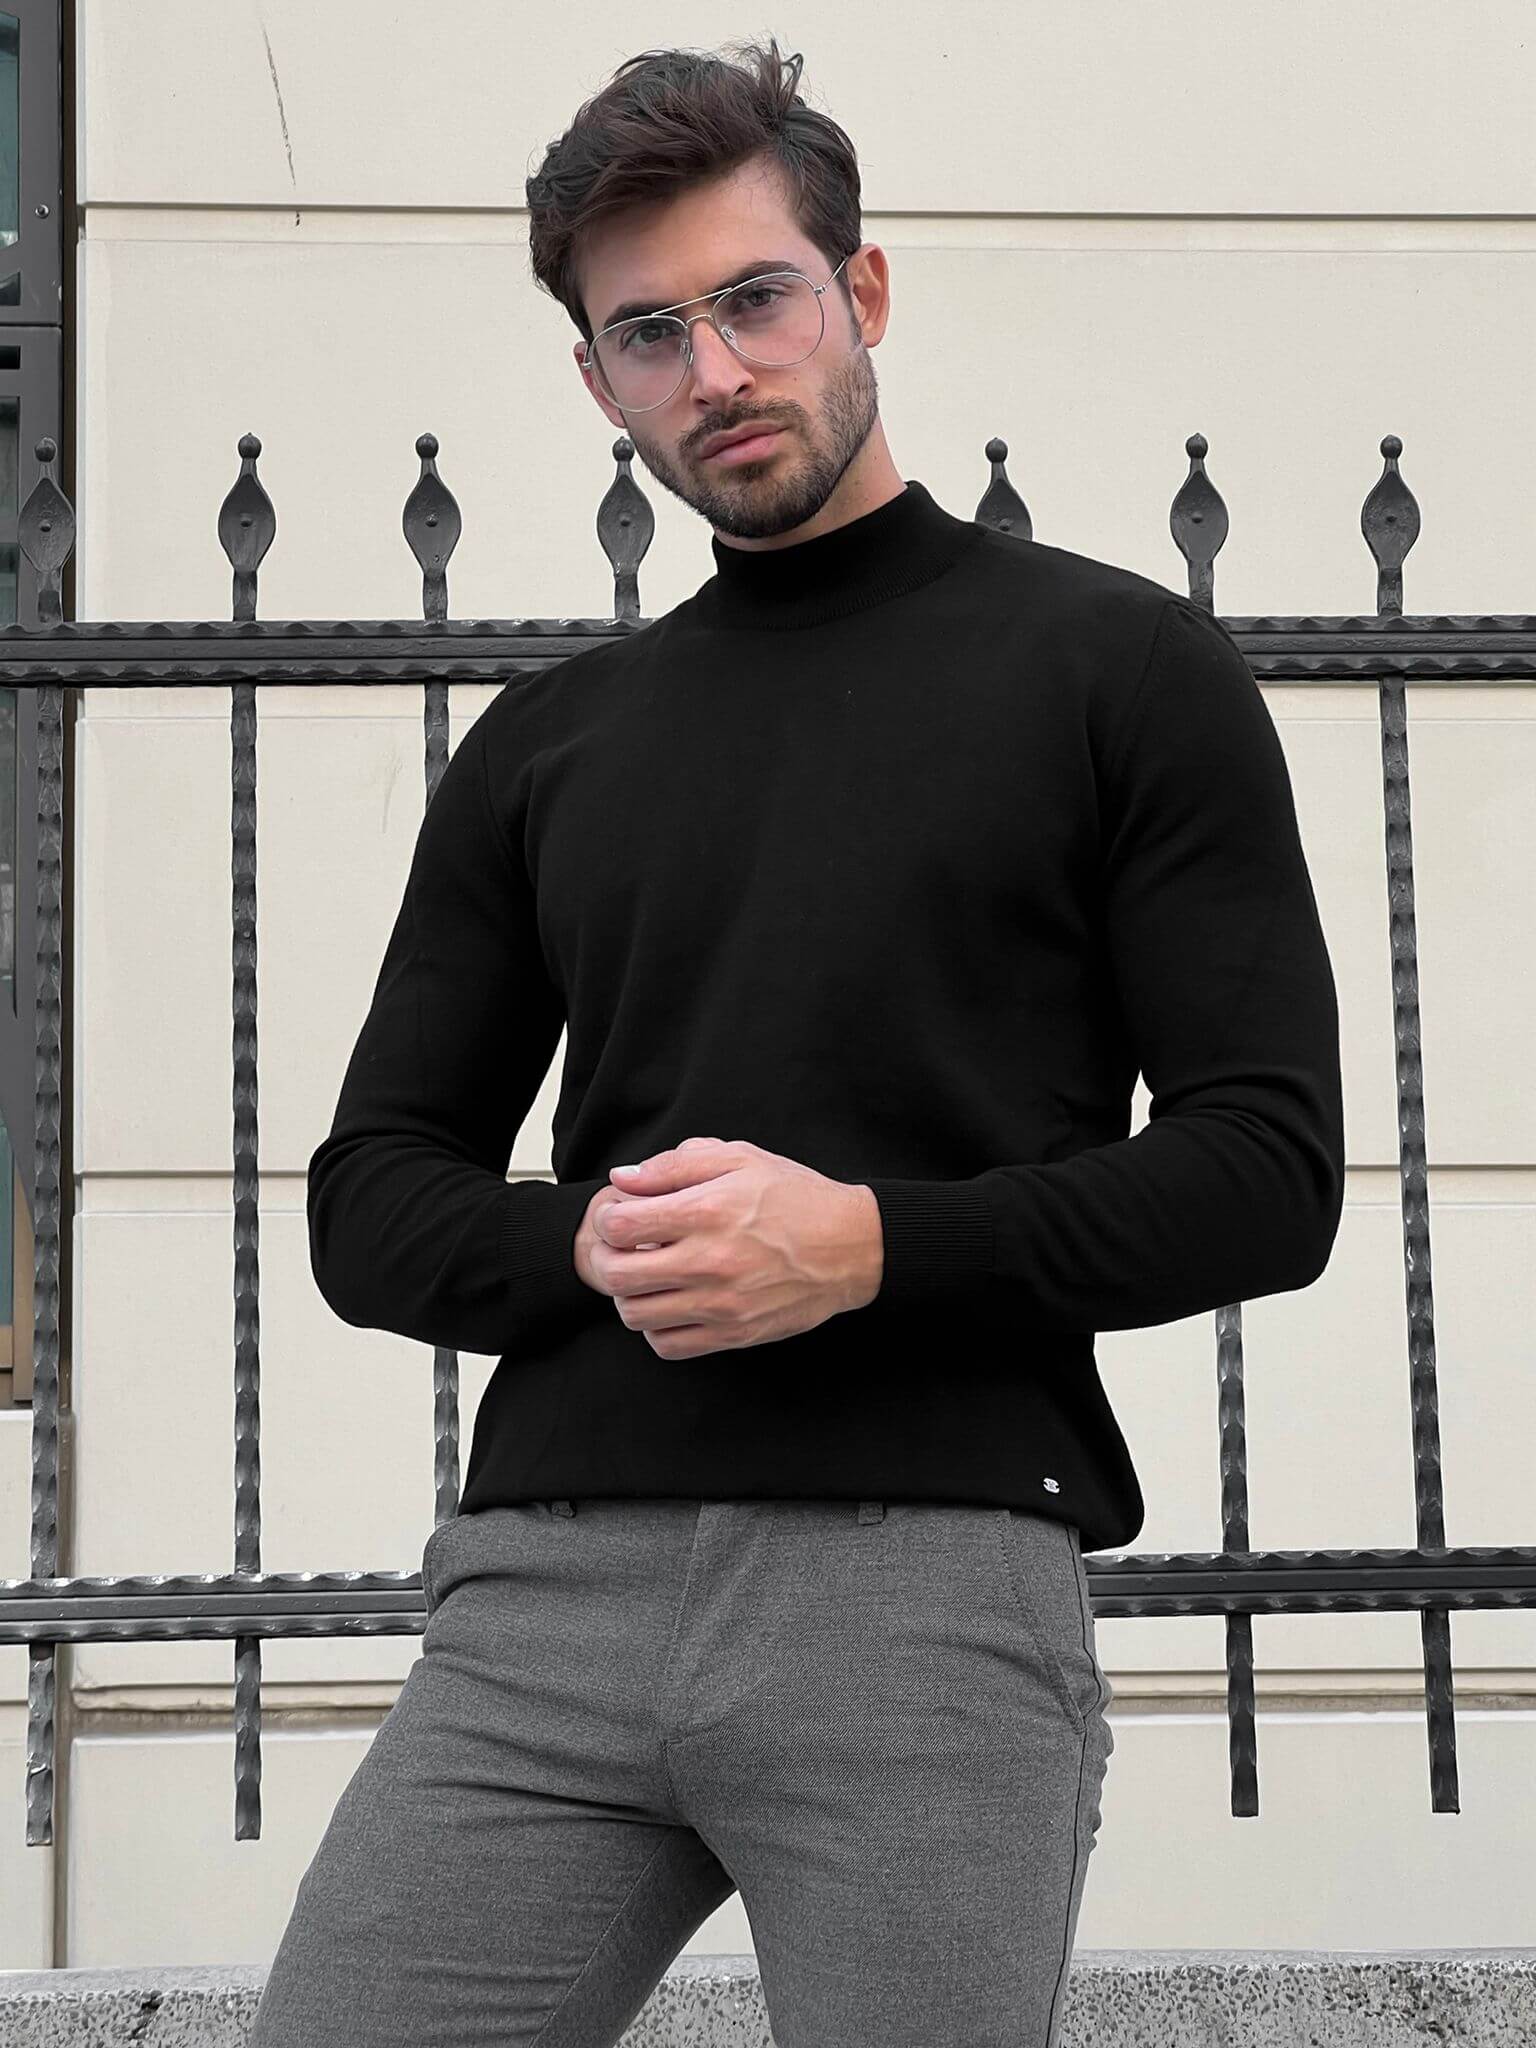 Hart Black Mock Turtleneck": A close-up view of a stylish black mock turtleneck sweater with a comfortable fit and sleek design.